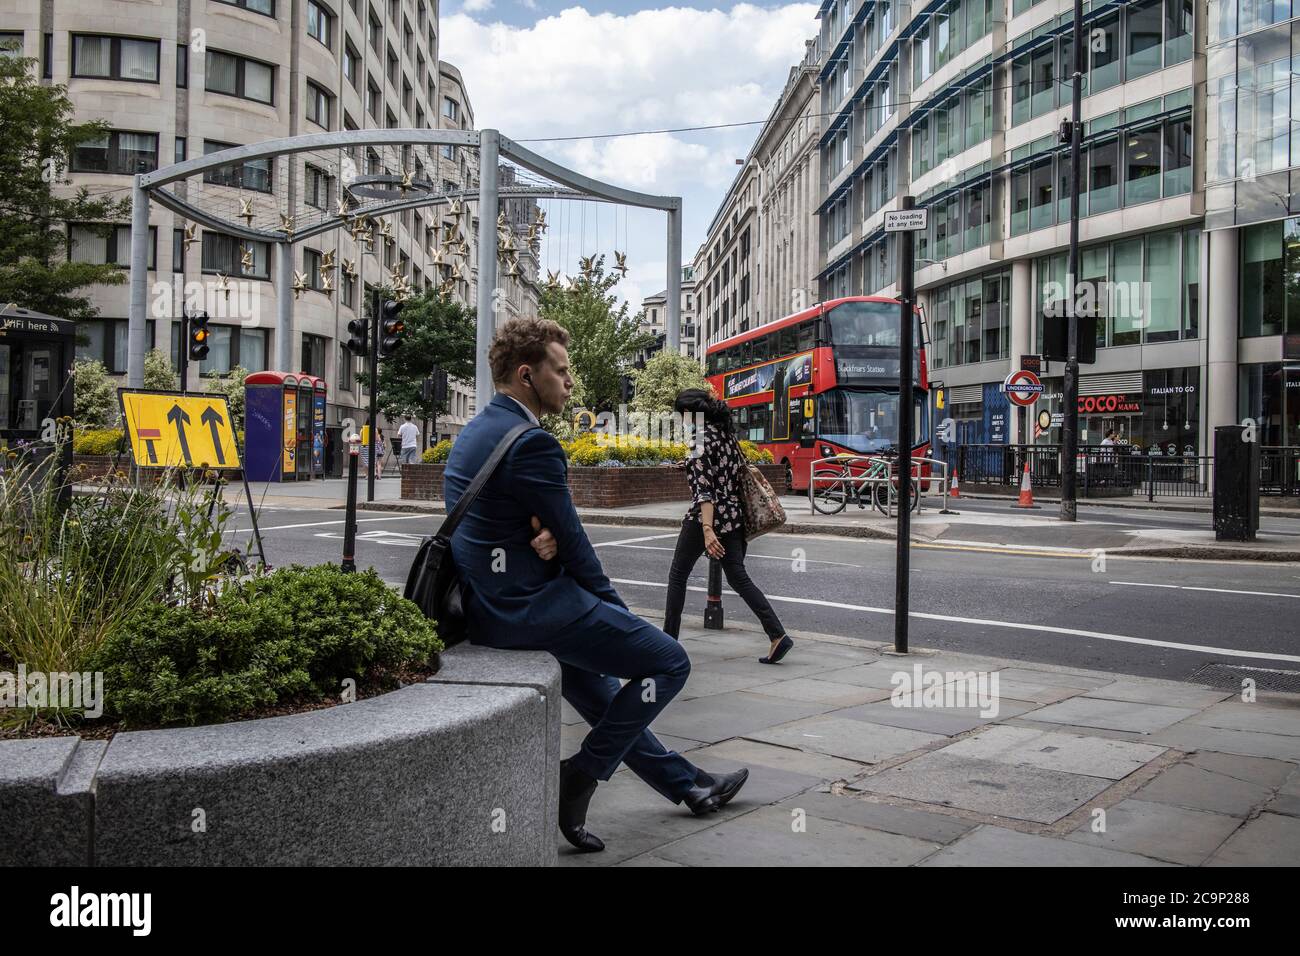 Middle aged man skateboards down Cheapside in the City of London financial district on a weekday afternoon, London, UK Stock Photo